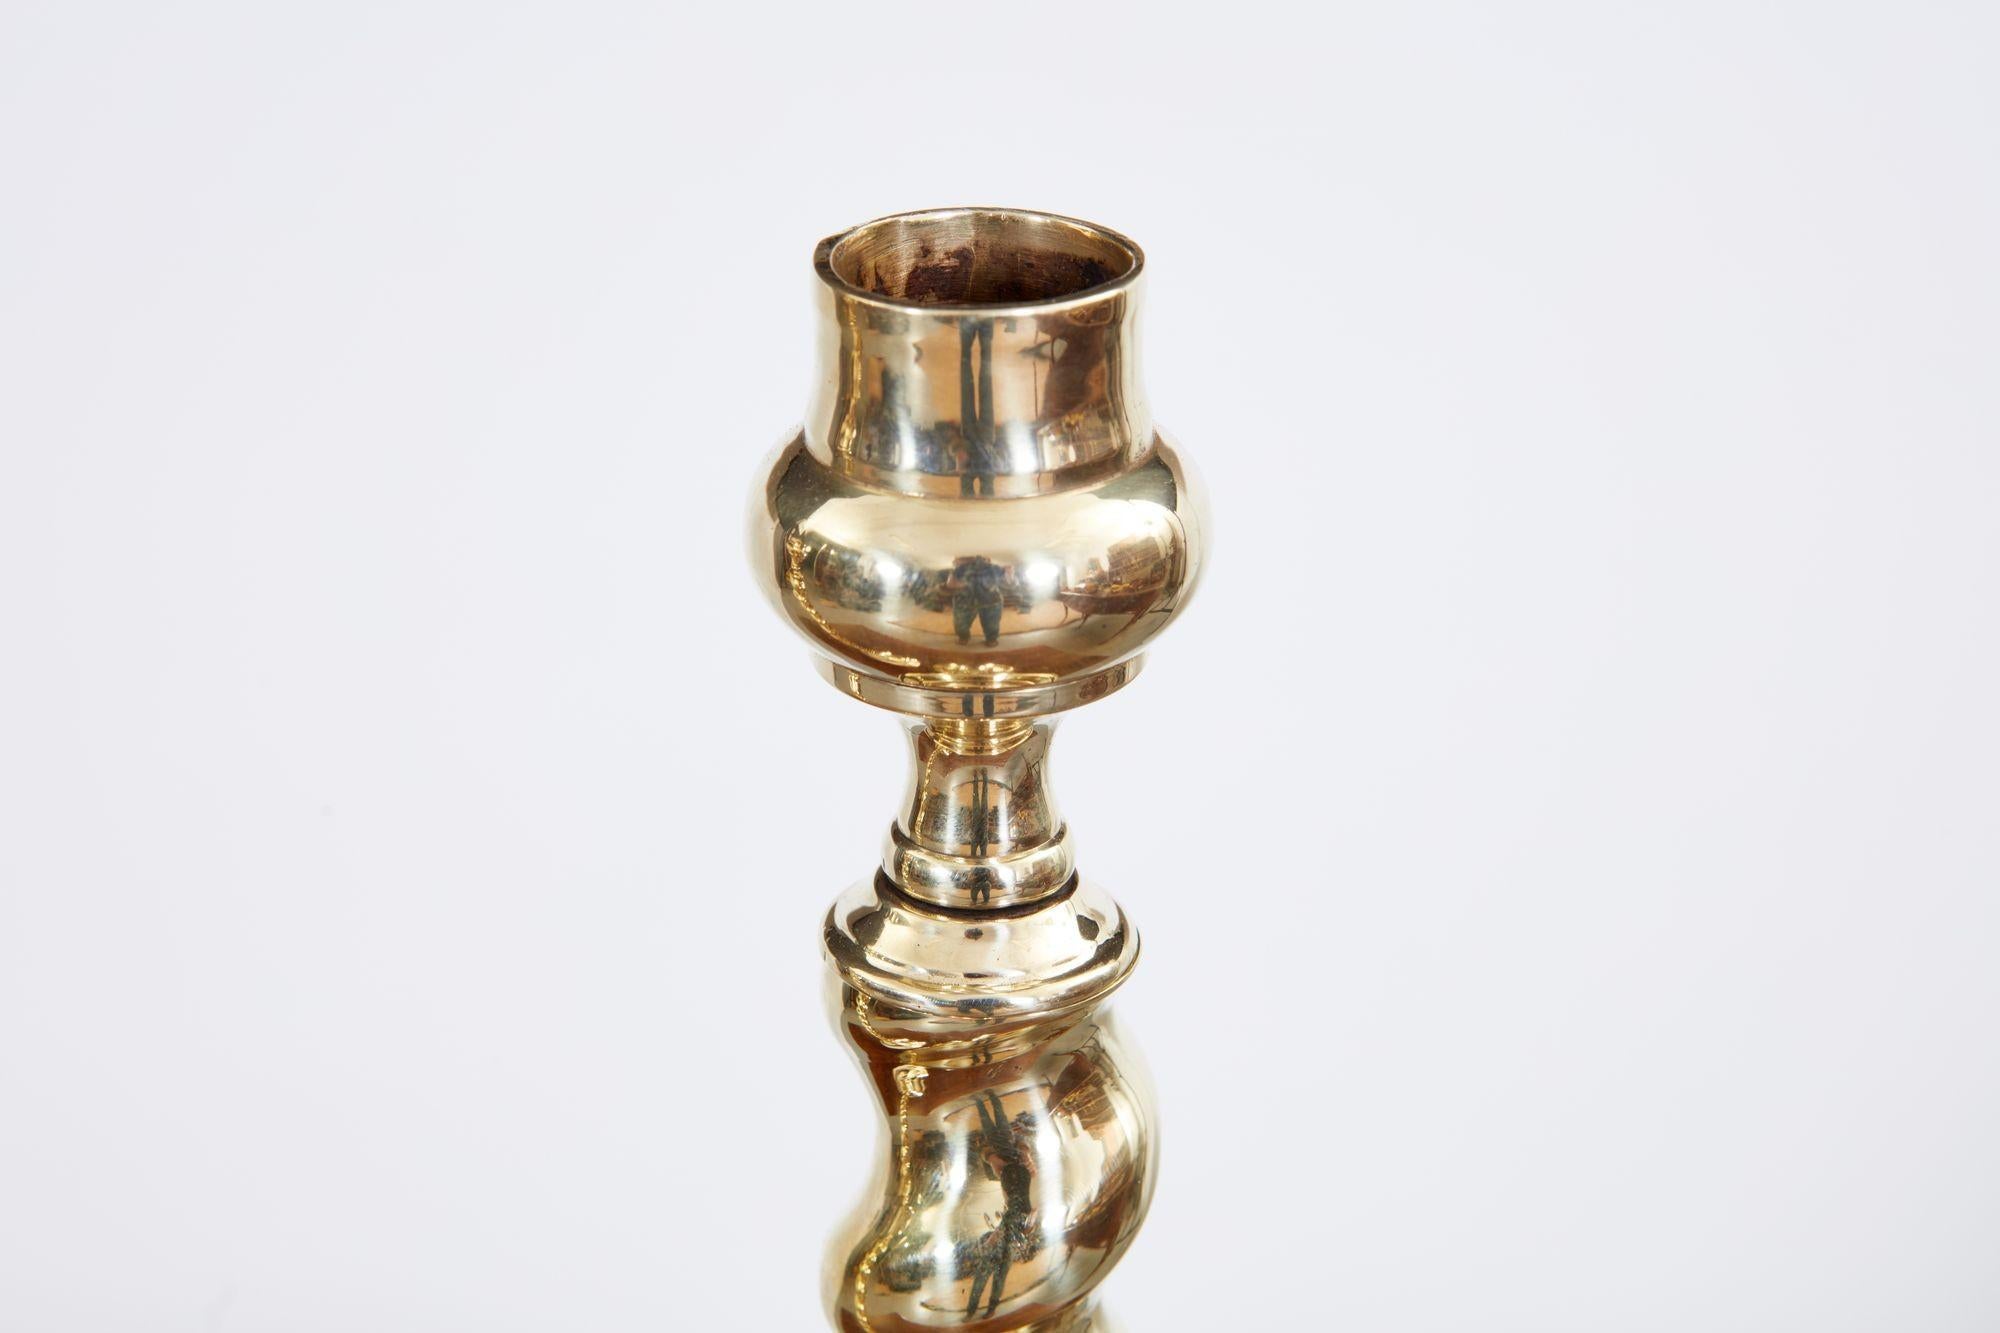 A pair of English late 19th century brass candlesticks with bulb tops over barley-twist shafts and standing on circular bases, having good scale.